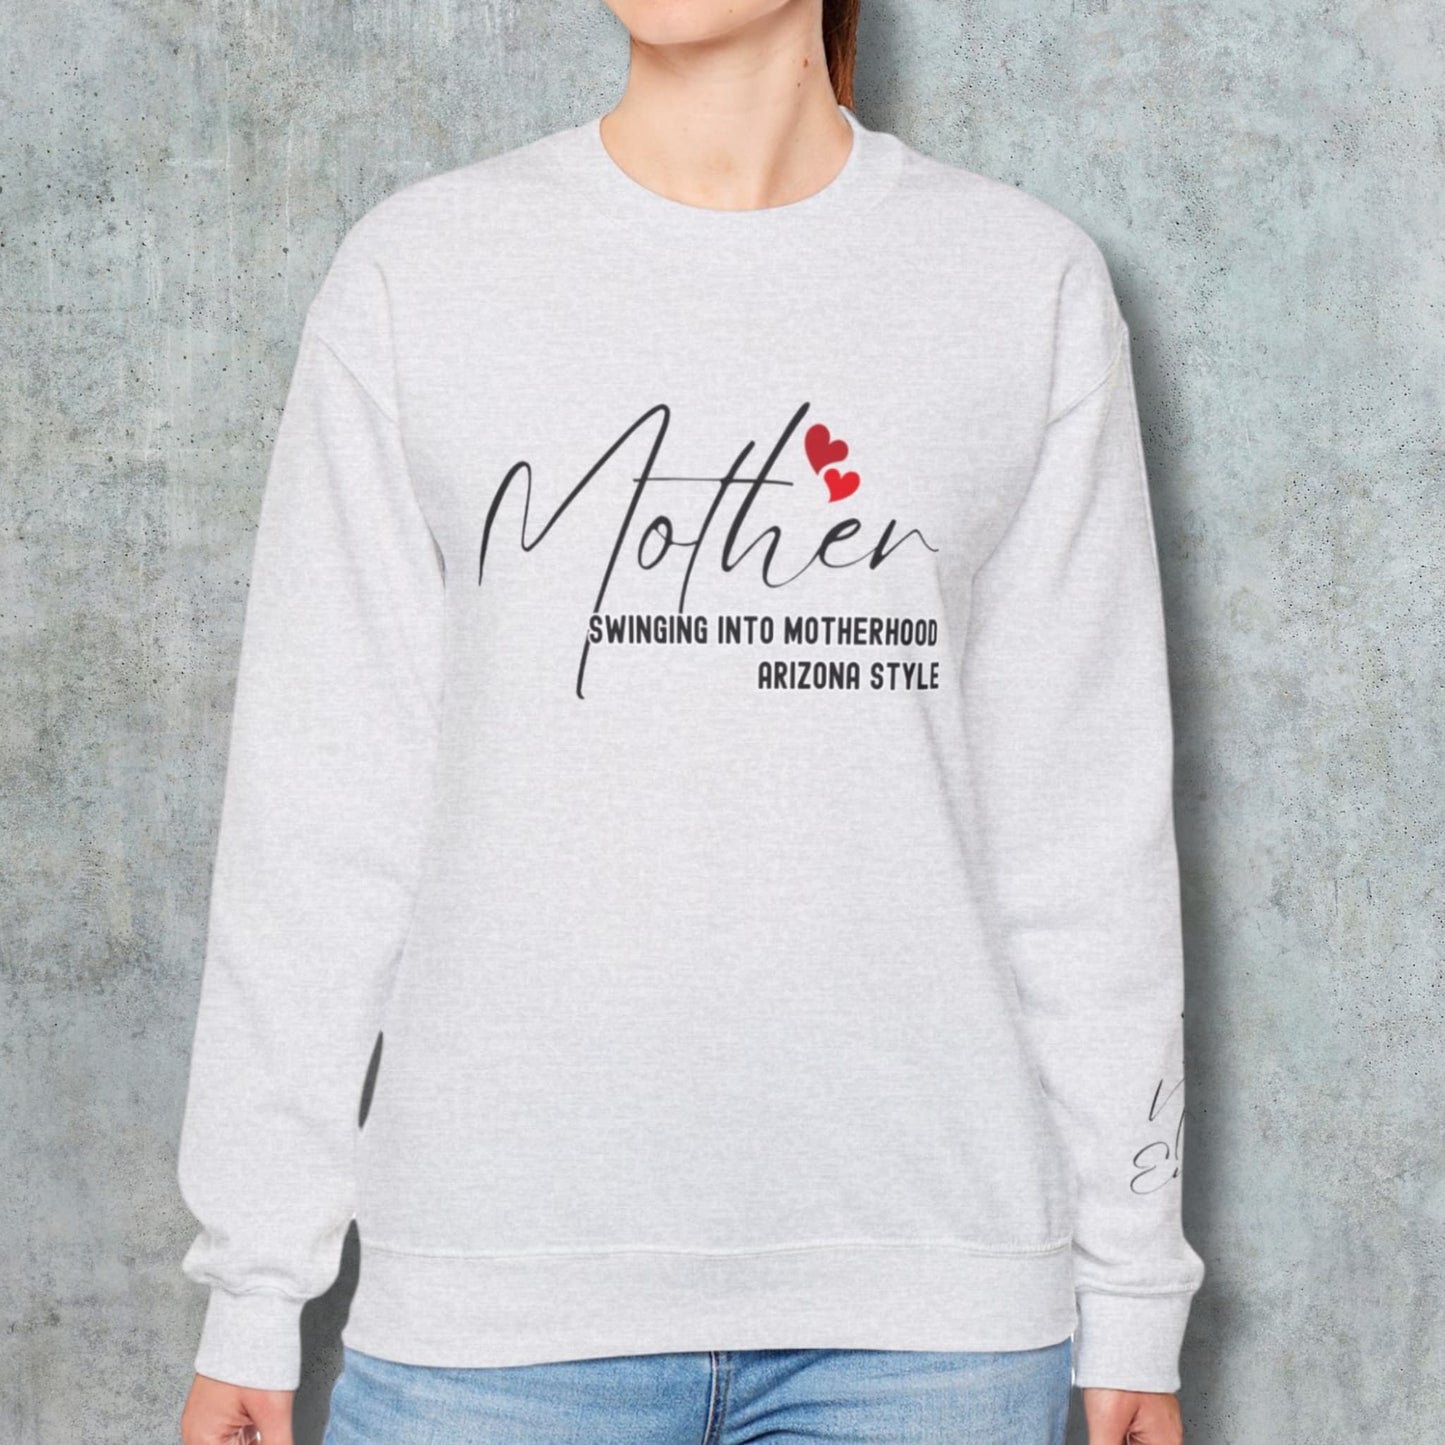  Woman modeling the Custom Baseball Mom Crewneck Sweatshirt with a wall background, highlighting the fit and Arizona style design.Custom Baseball Mom Arizona Style Sweatshirt displayed on a wooden surface, accompanied by flowers and women's accessories, creating an elegant flatlay.